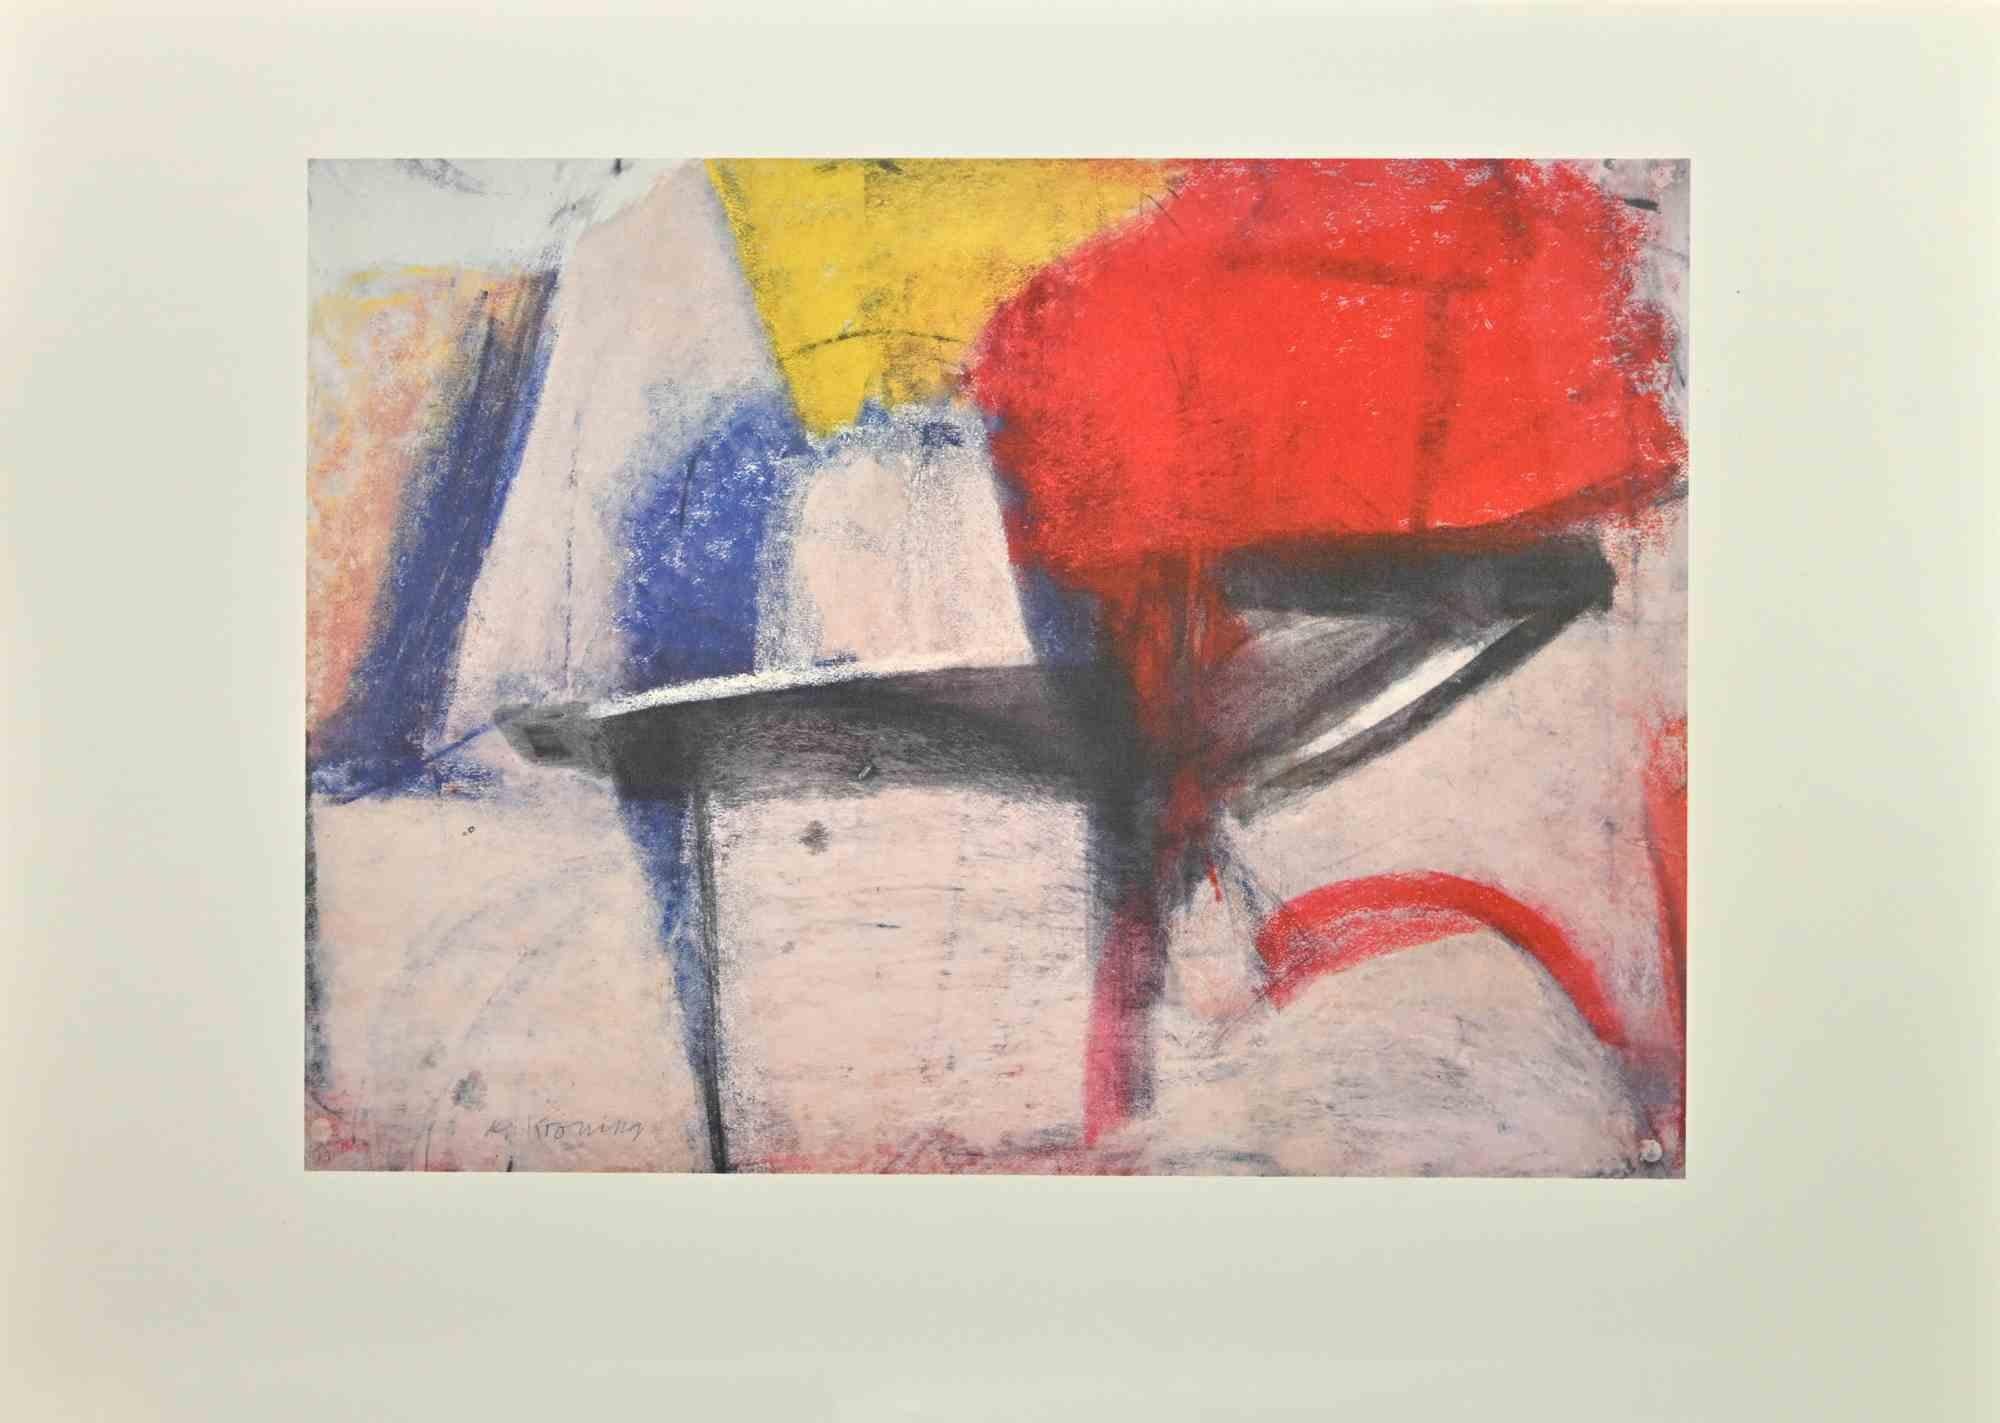 Willem de Kooning Abstract Print - Untitled - Offset and Lithograph after Willem De Kooning - 1985